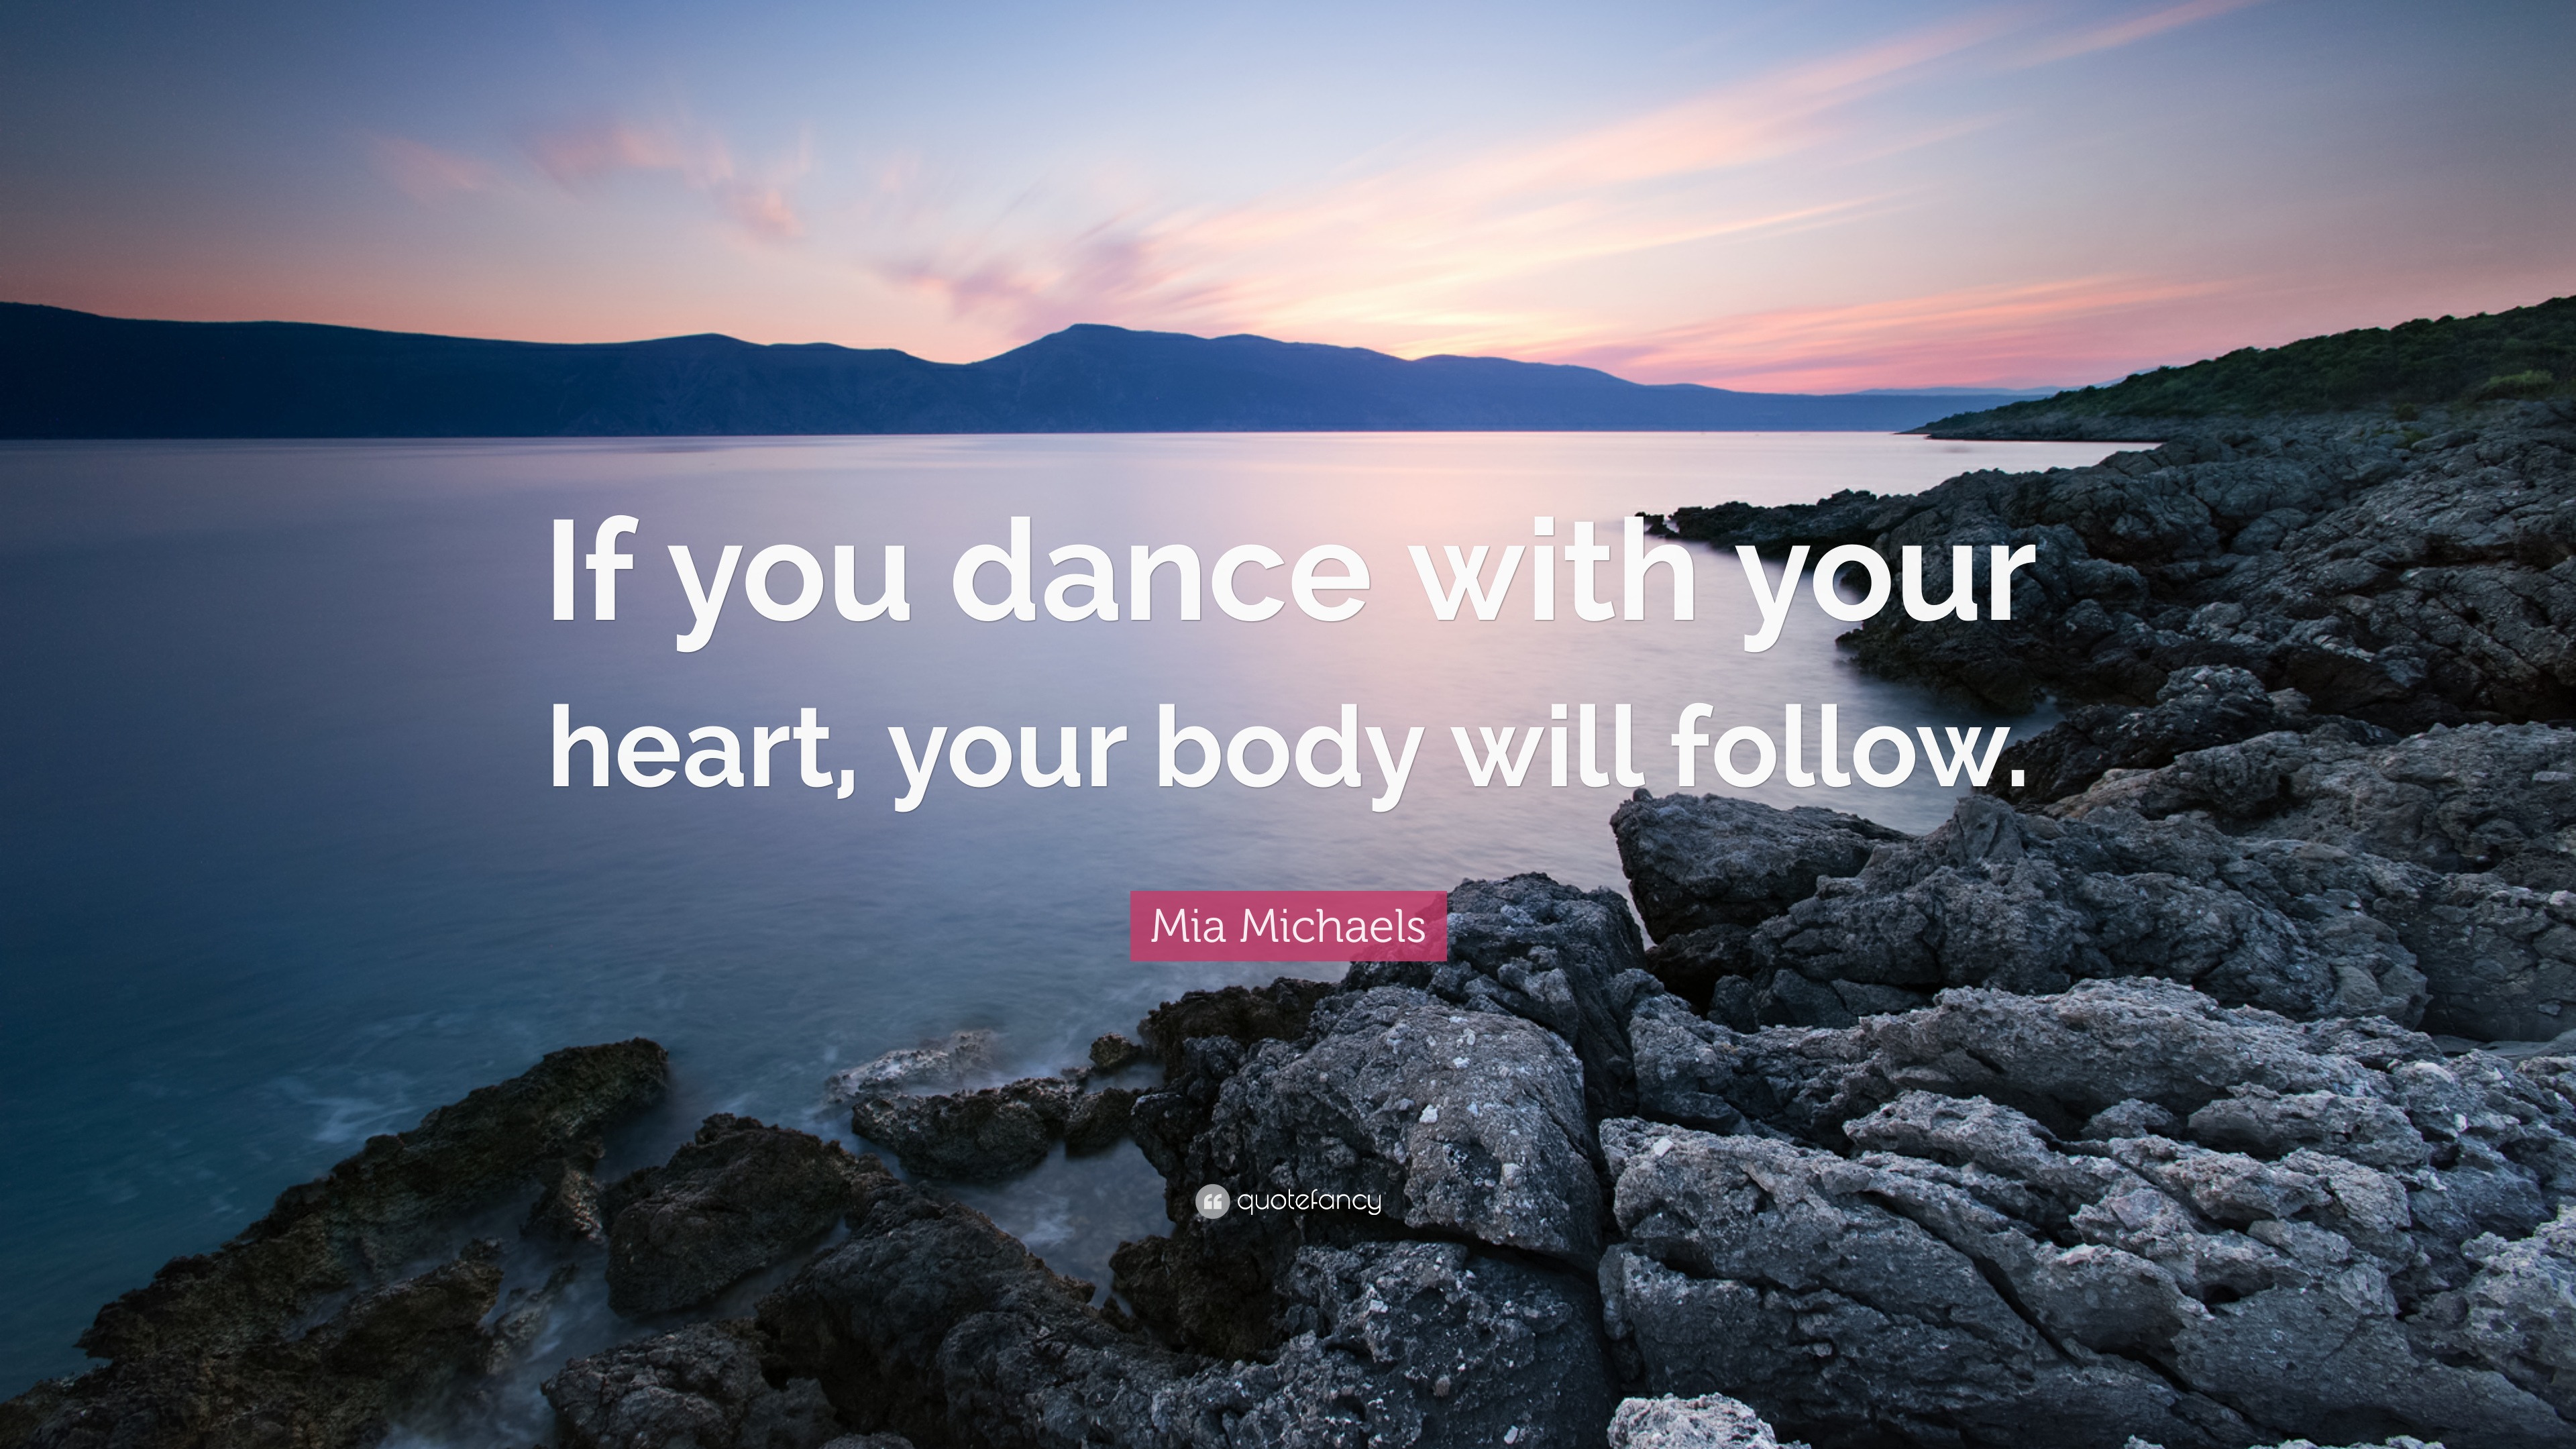 Mia Michaels Quote “if You Dance With Your Heart Your Body Will Follow” 